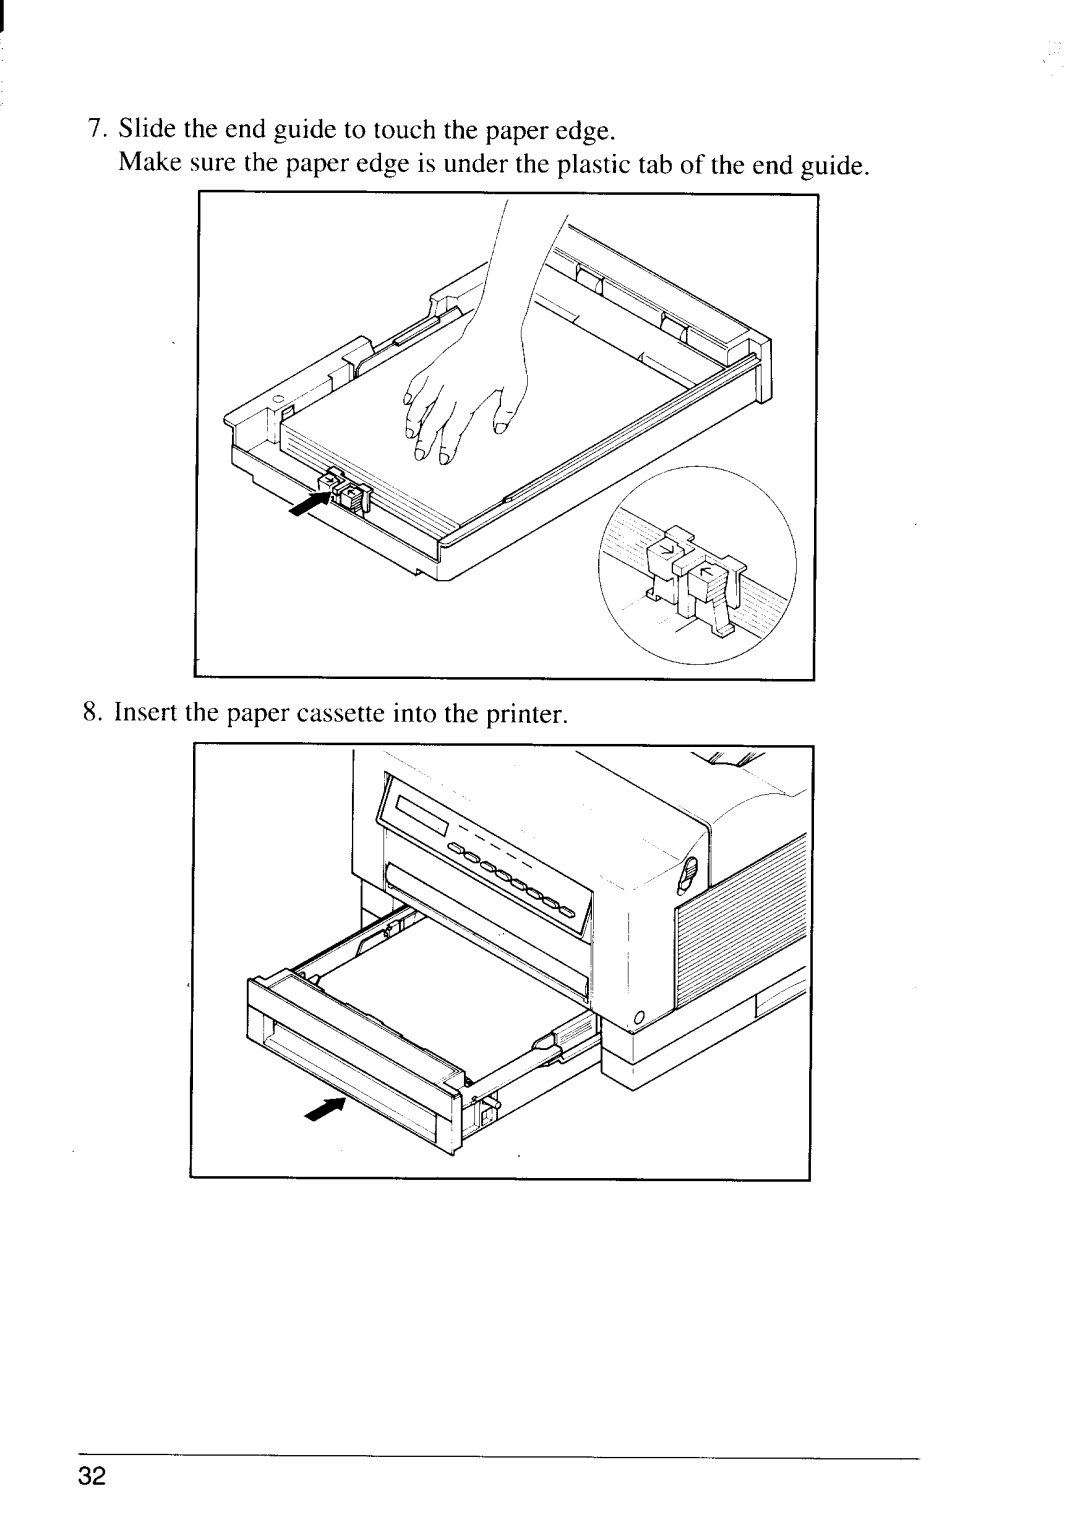 Star Micronics LS-5 EX, LS-5 TT Slide the end guide to touch the paper edge, Insert the paper cassette into the printer 